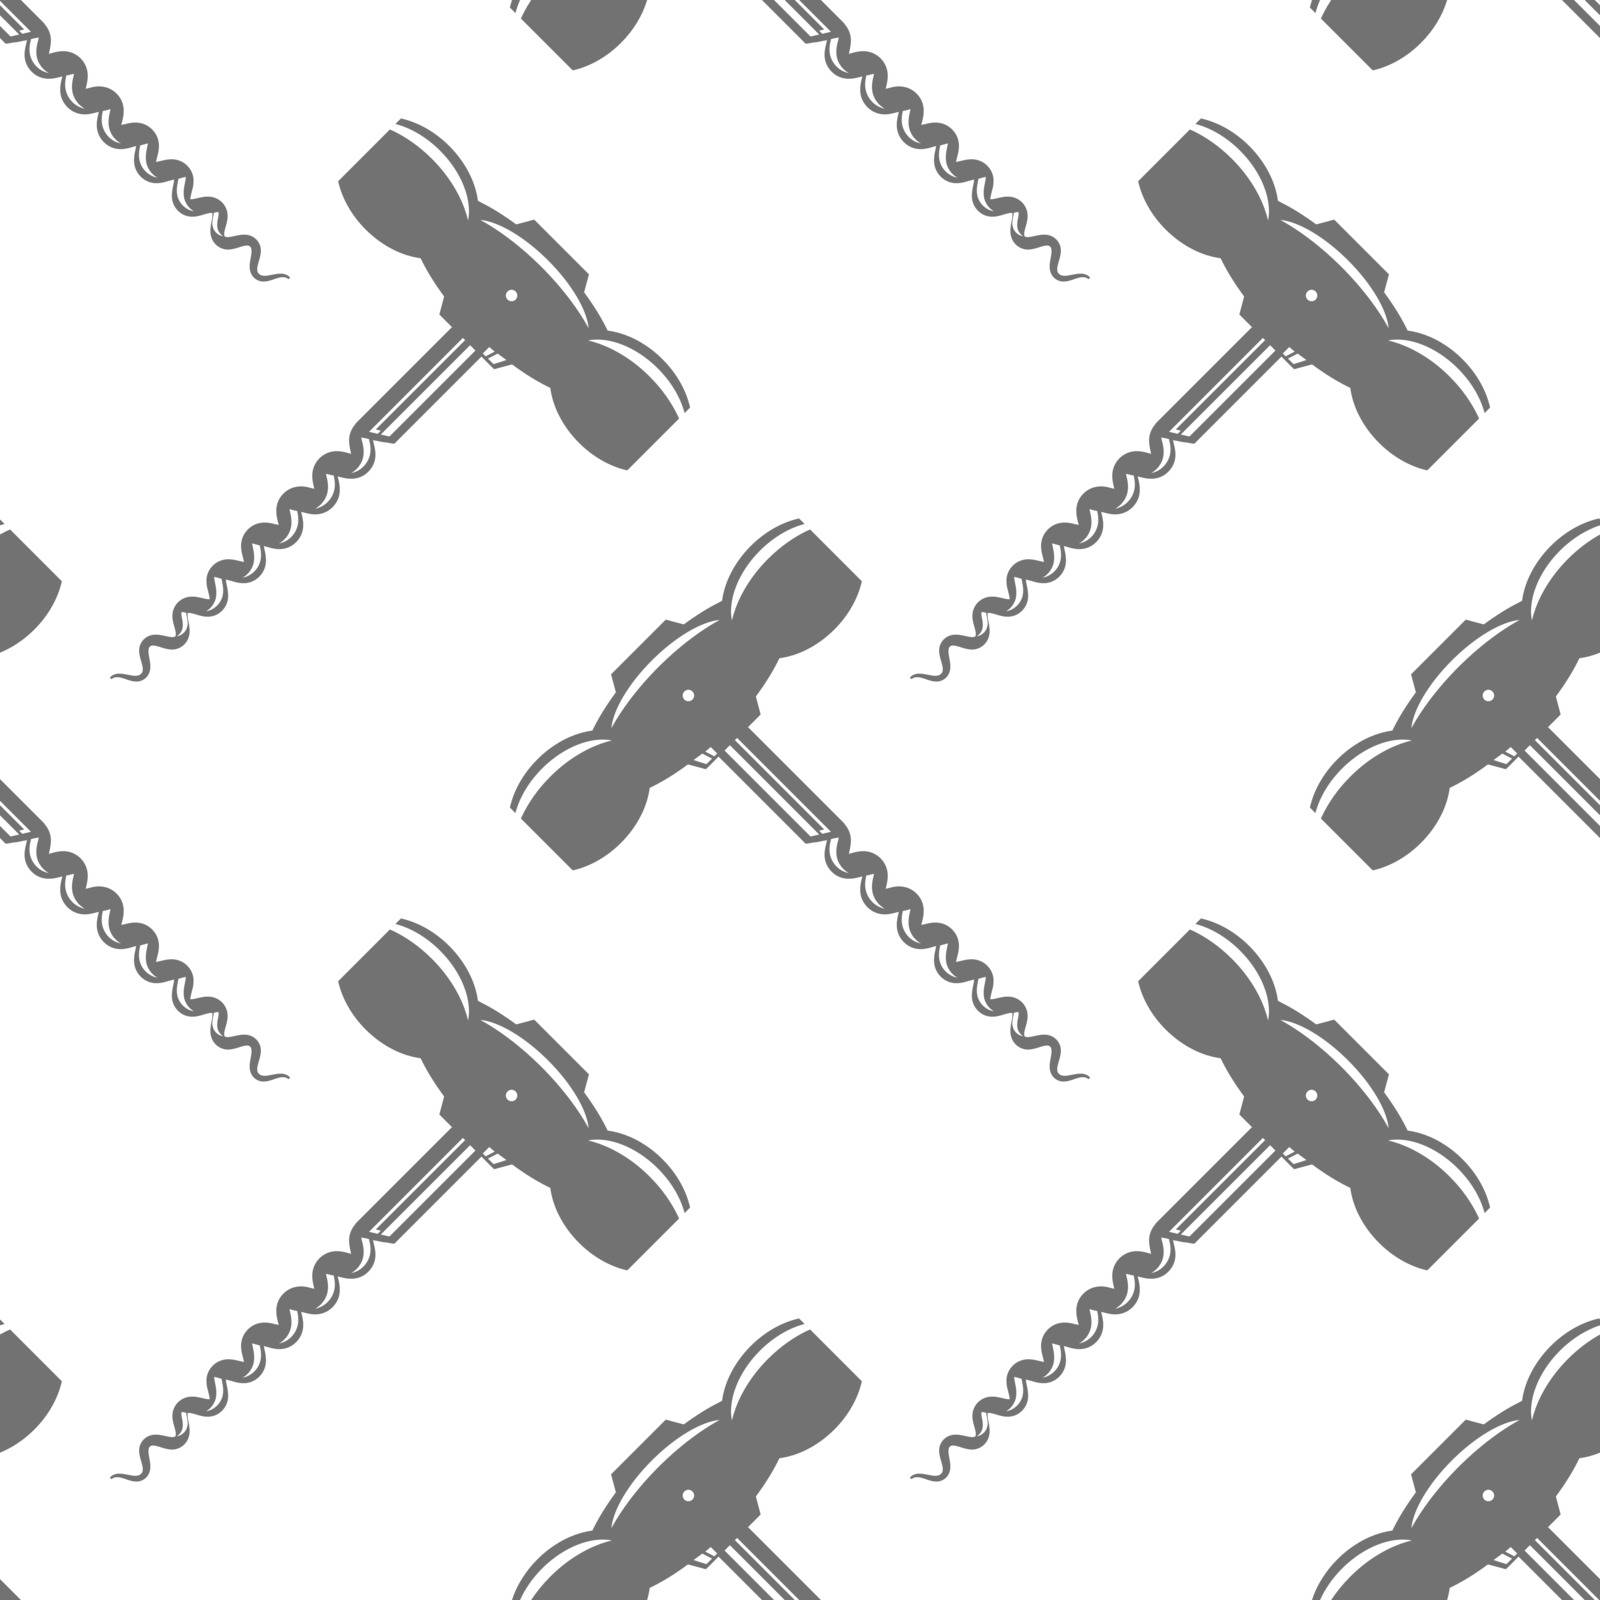 Retro Wood Corkscrew Icon Seamless Pattern for Opening Wine Bottle Isolated on White Background by valeo5